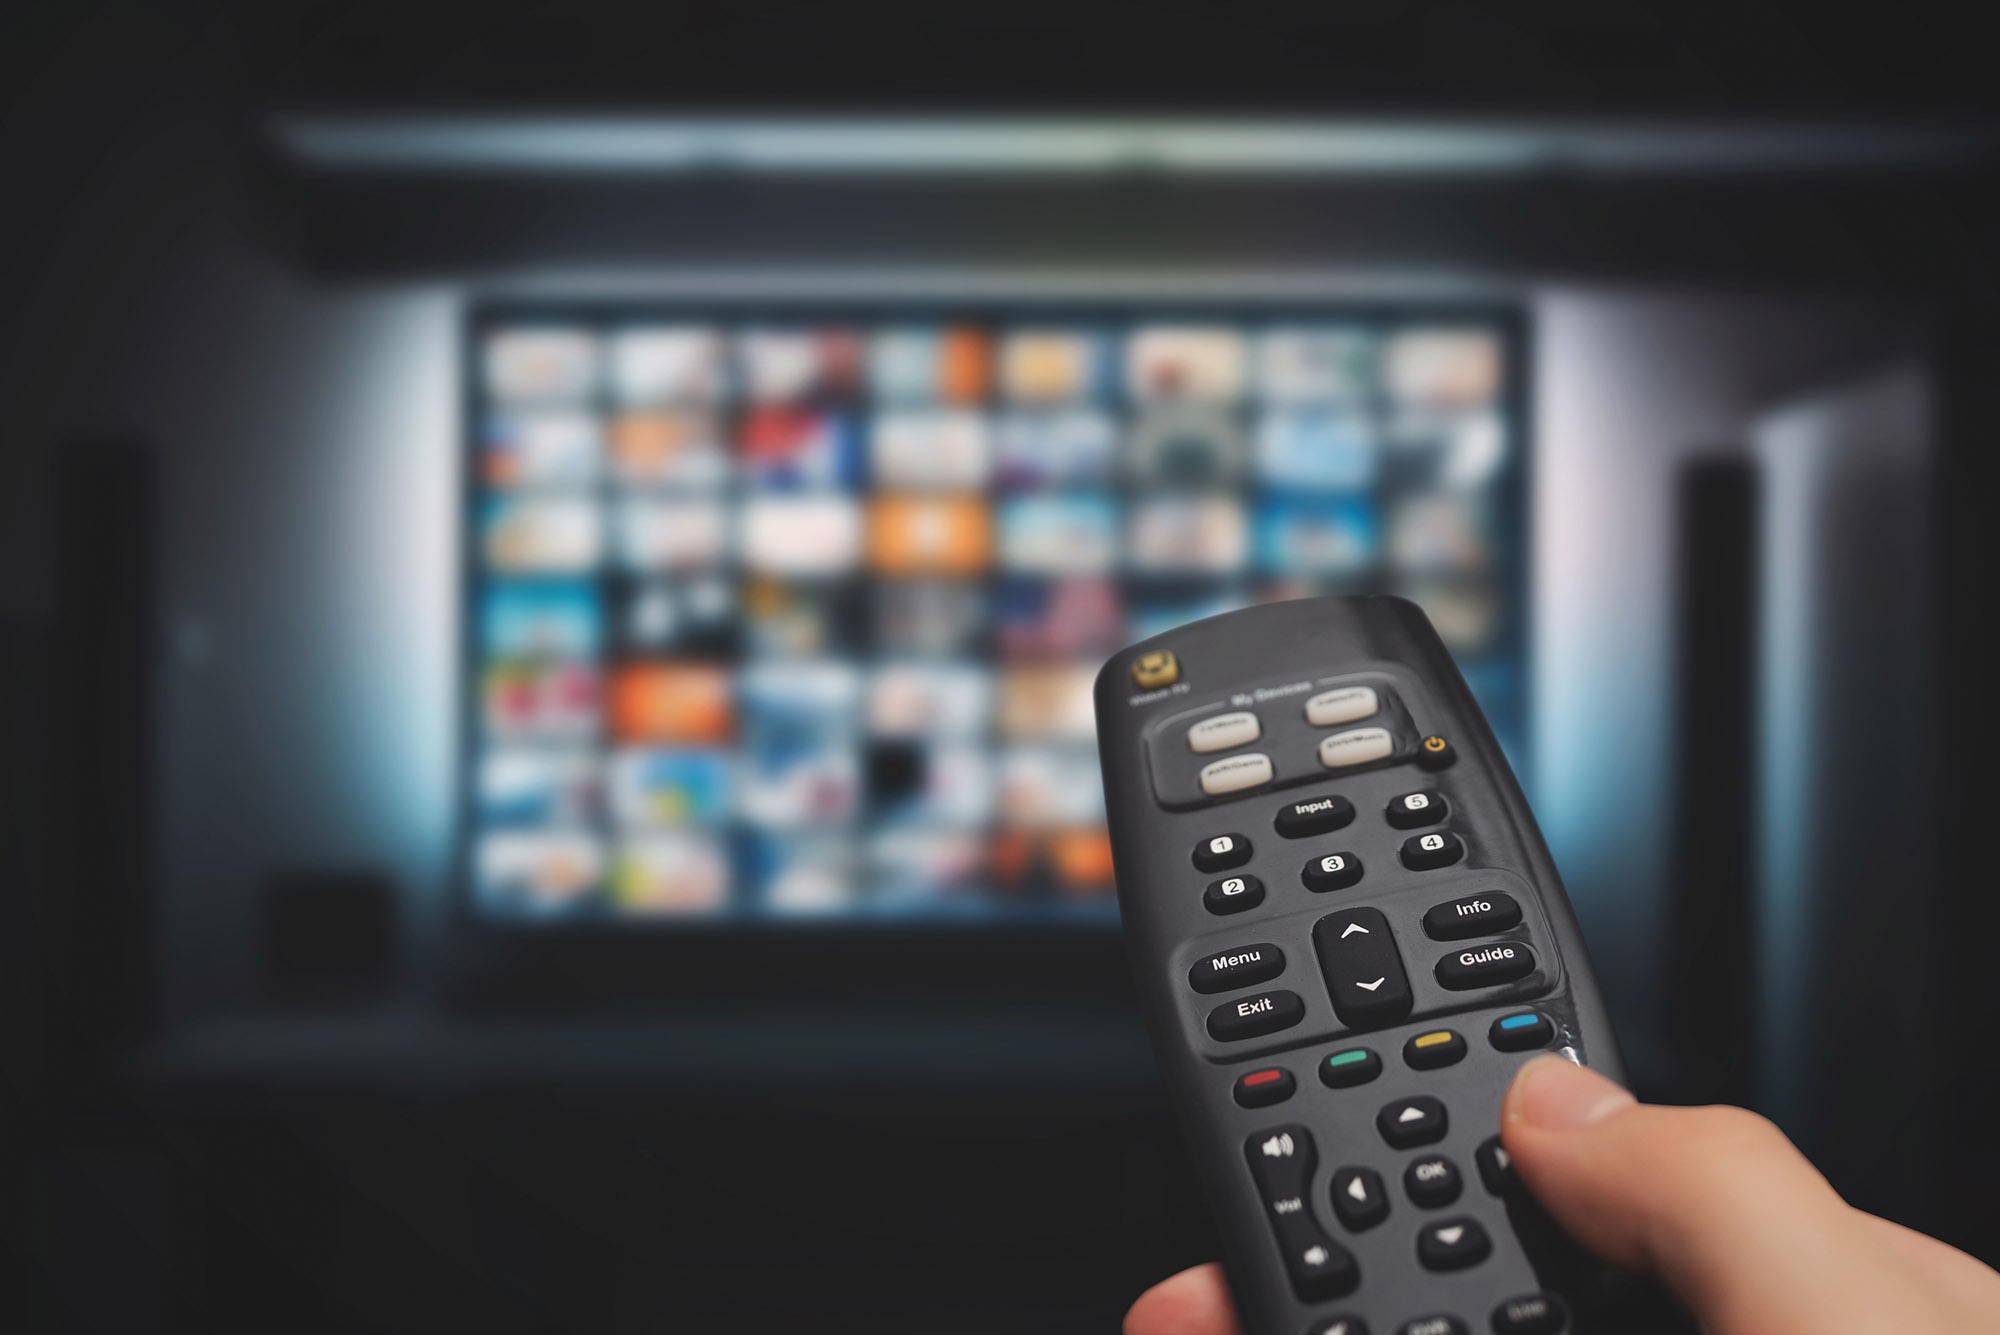 Wholesale Iptv Abonnement Allows Cable, TV, Or Streaming 